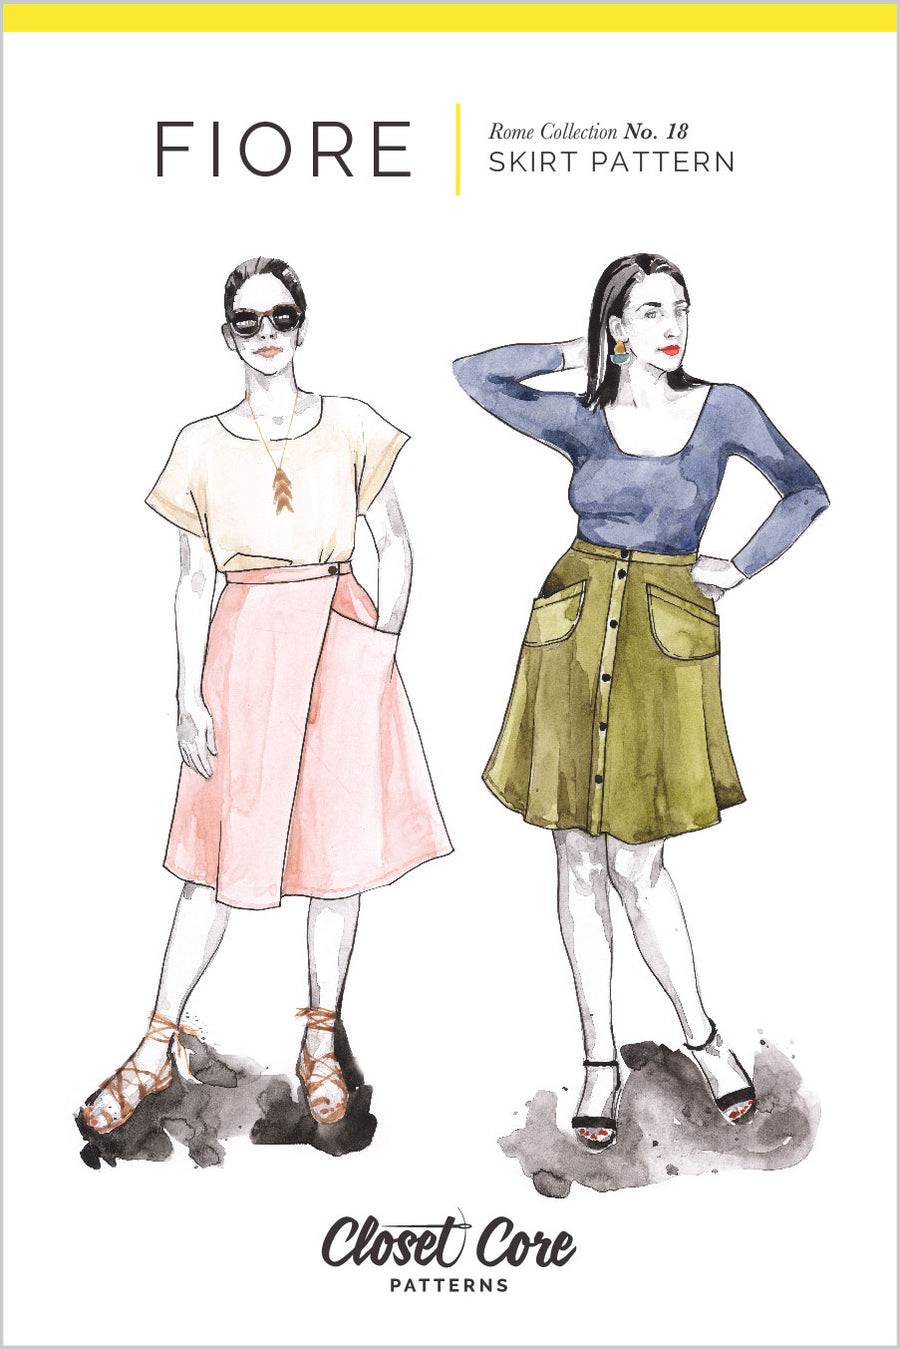 Fiore Skirt Sewing Pattern - Flared A-line skirt pattern - Envelope Front | Closet Core Patterns